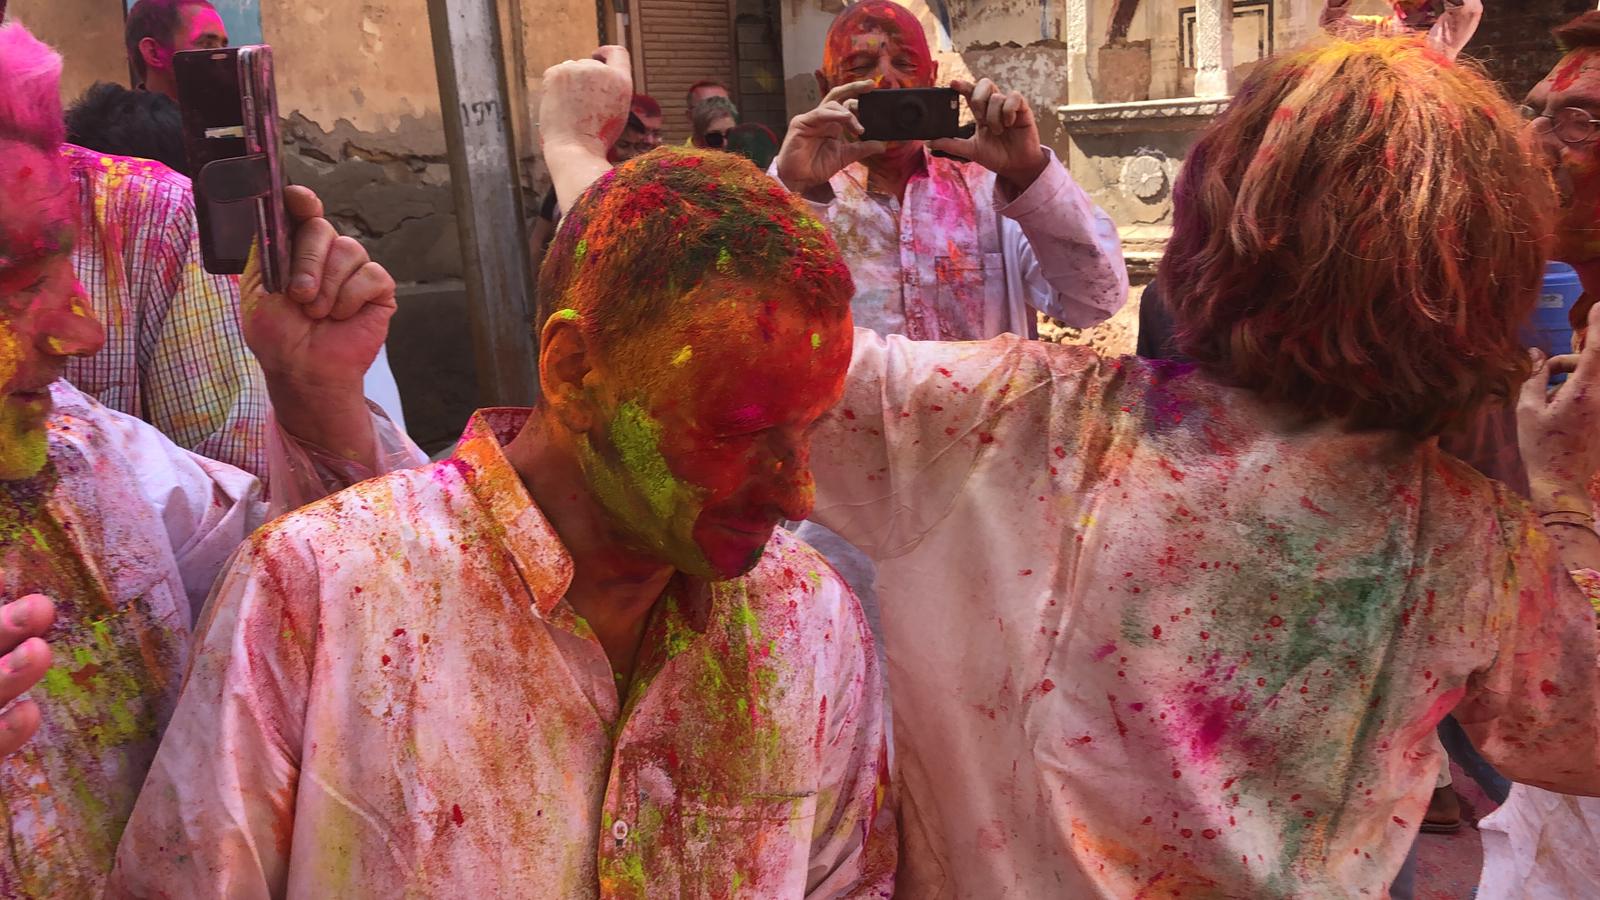 Foreign tourists splattered in vibrant colors of Holi in India I Enjoy Indian holi Festival with colors in India I Holi Trip